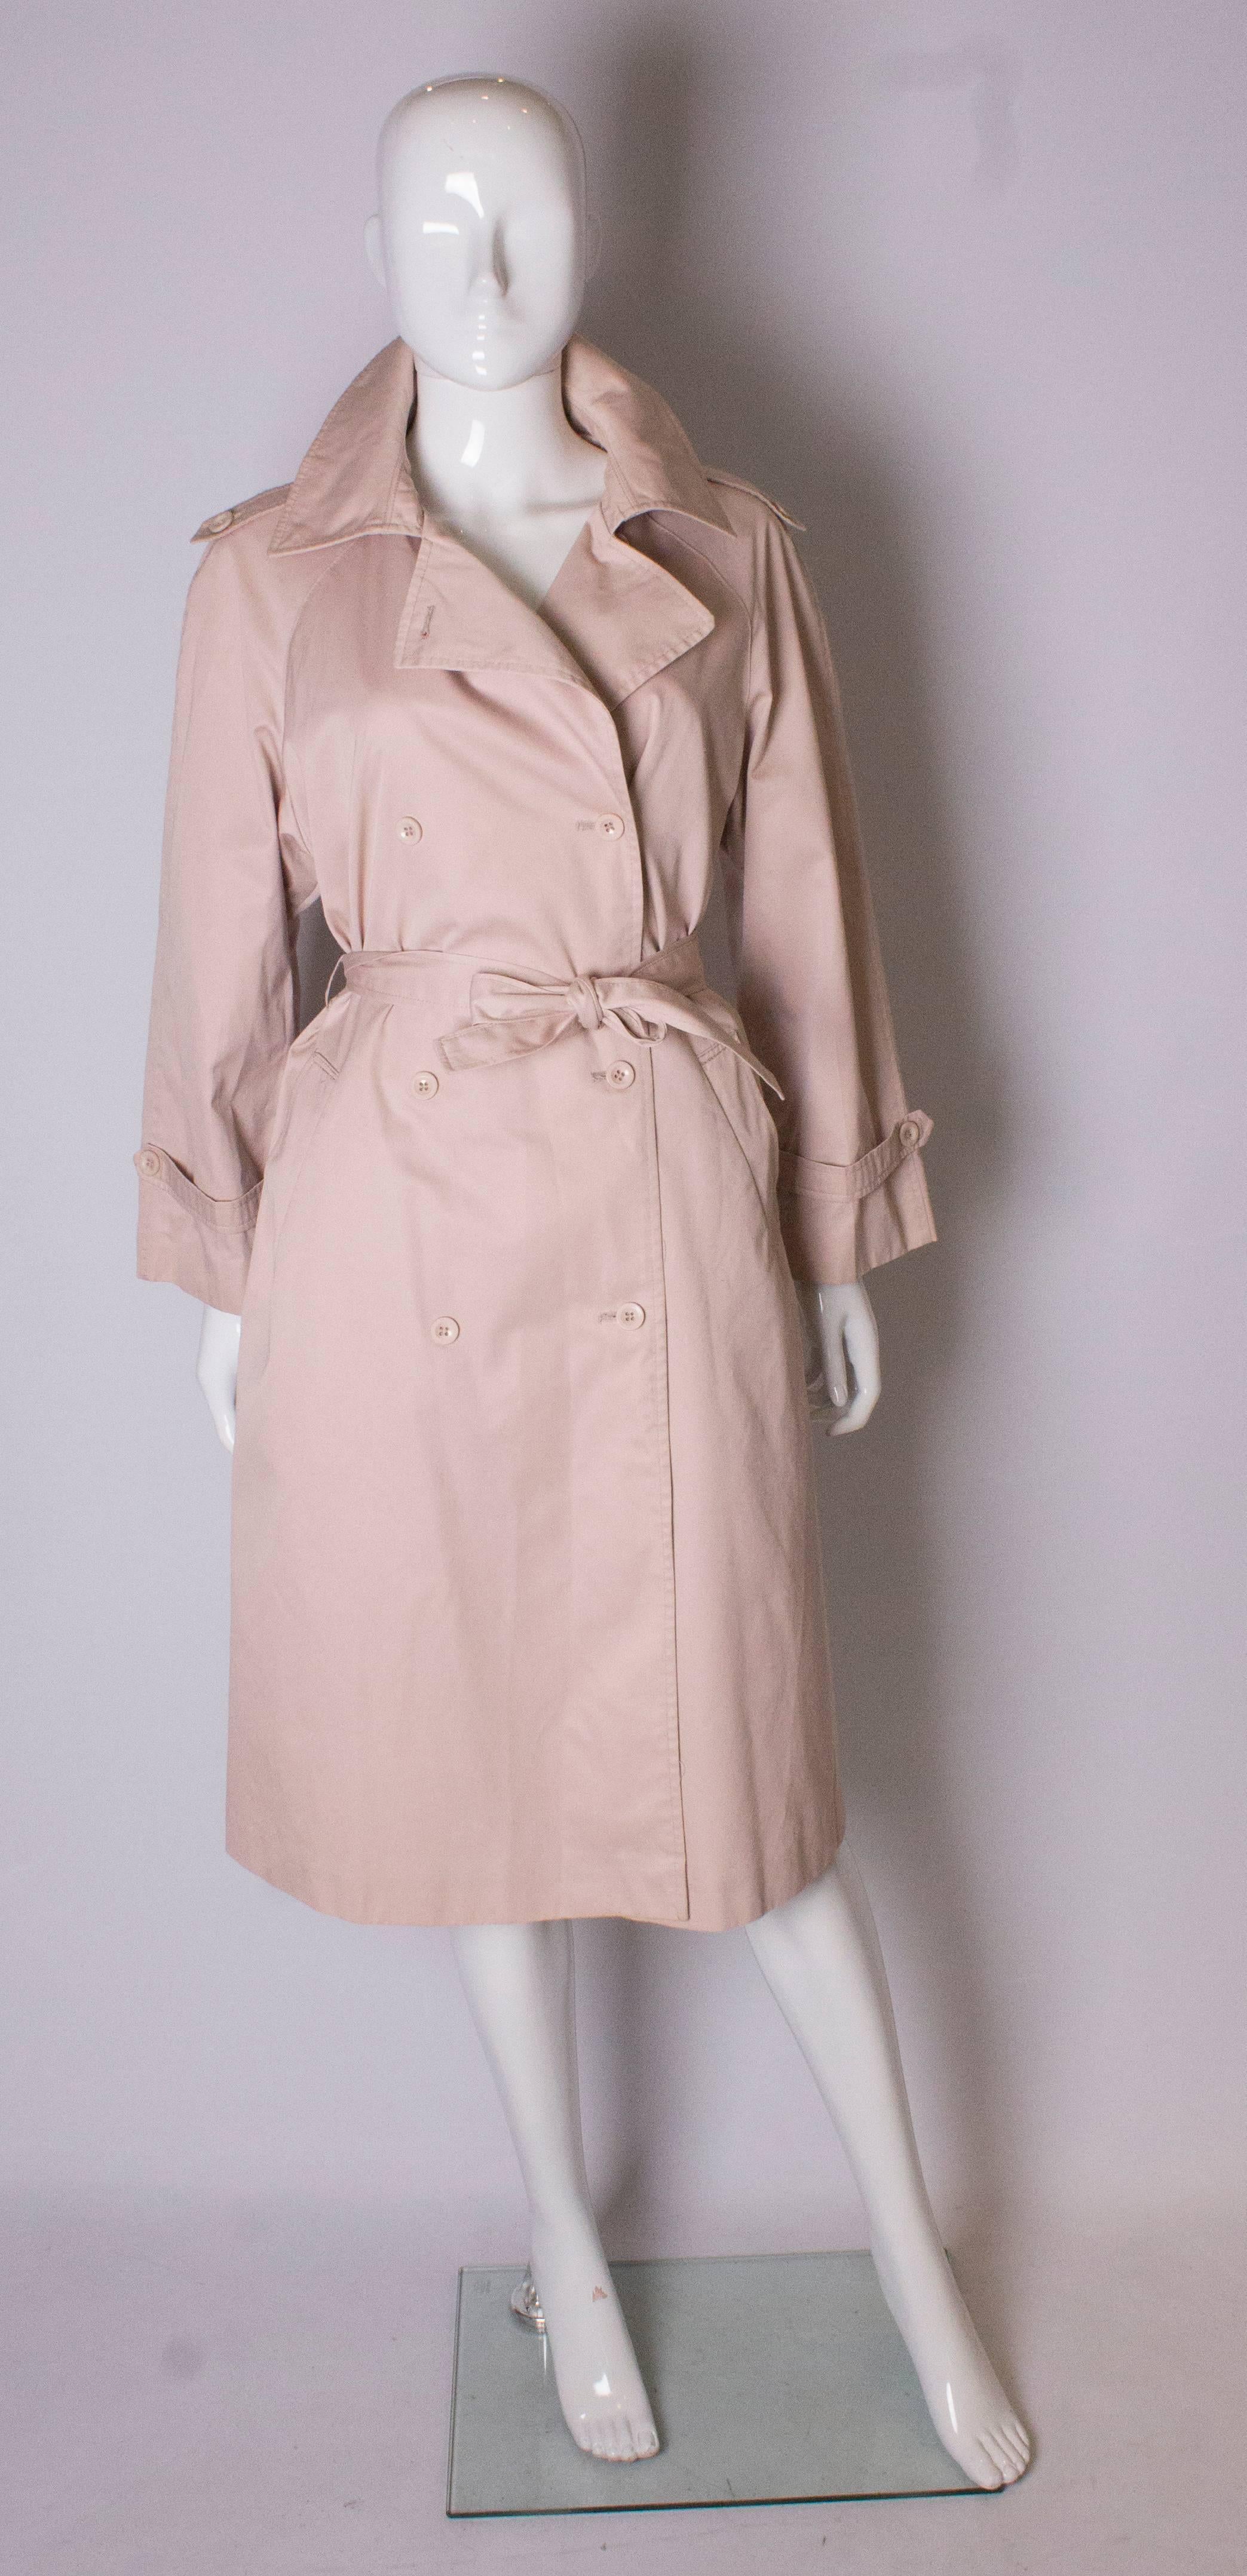 A chic pink coat by Pierre Cardin.The coat has two pockets and a self fabric belt.